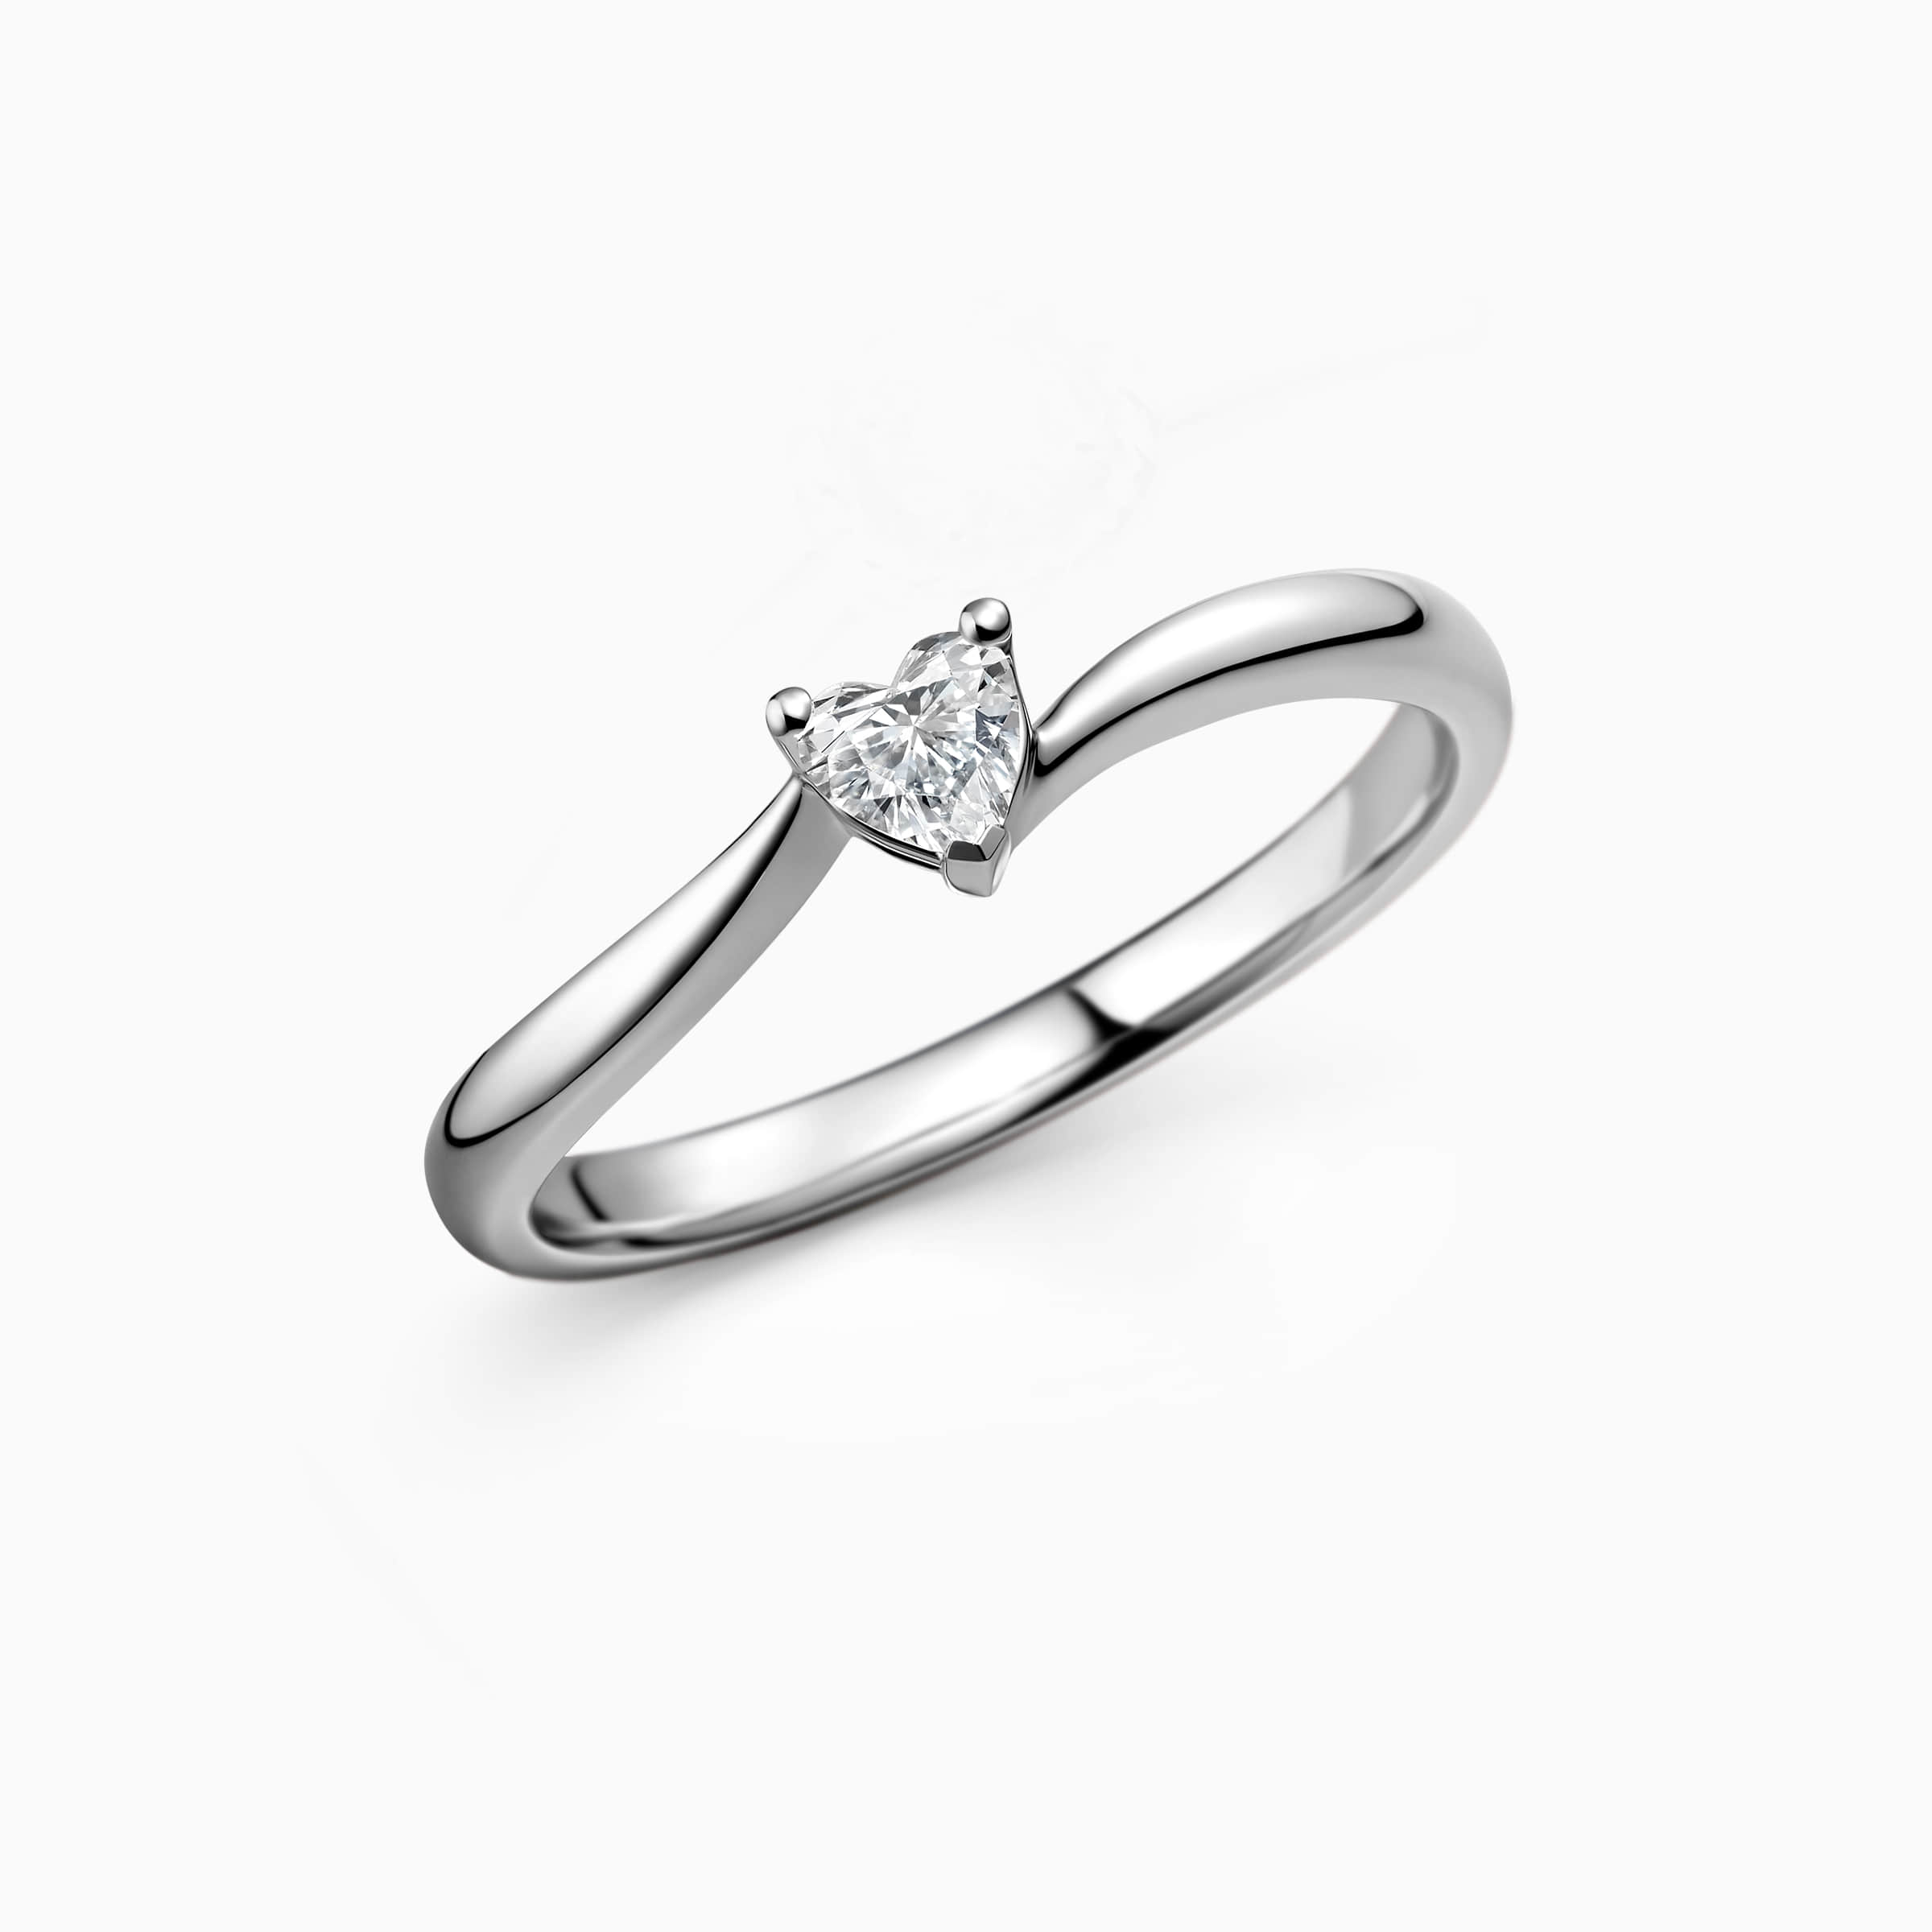 Darry Ring heart solitaire promise ring angle view